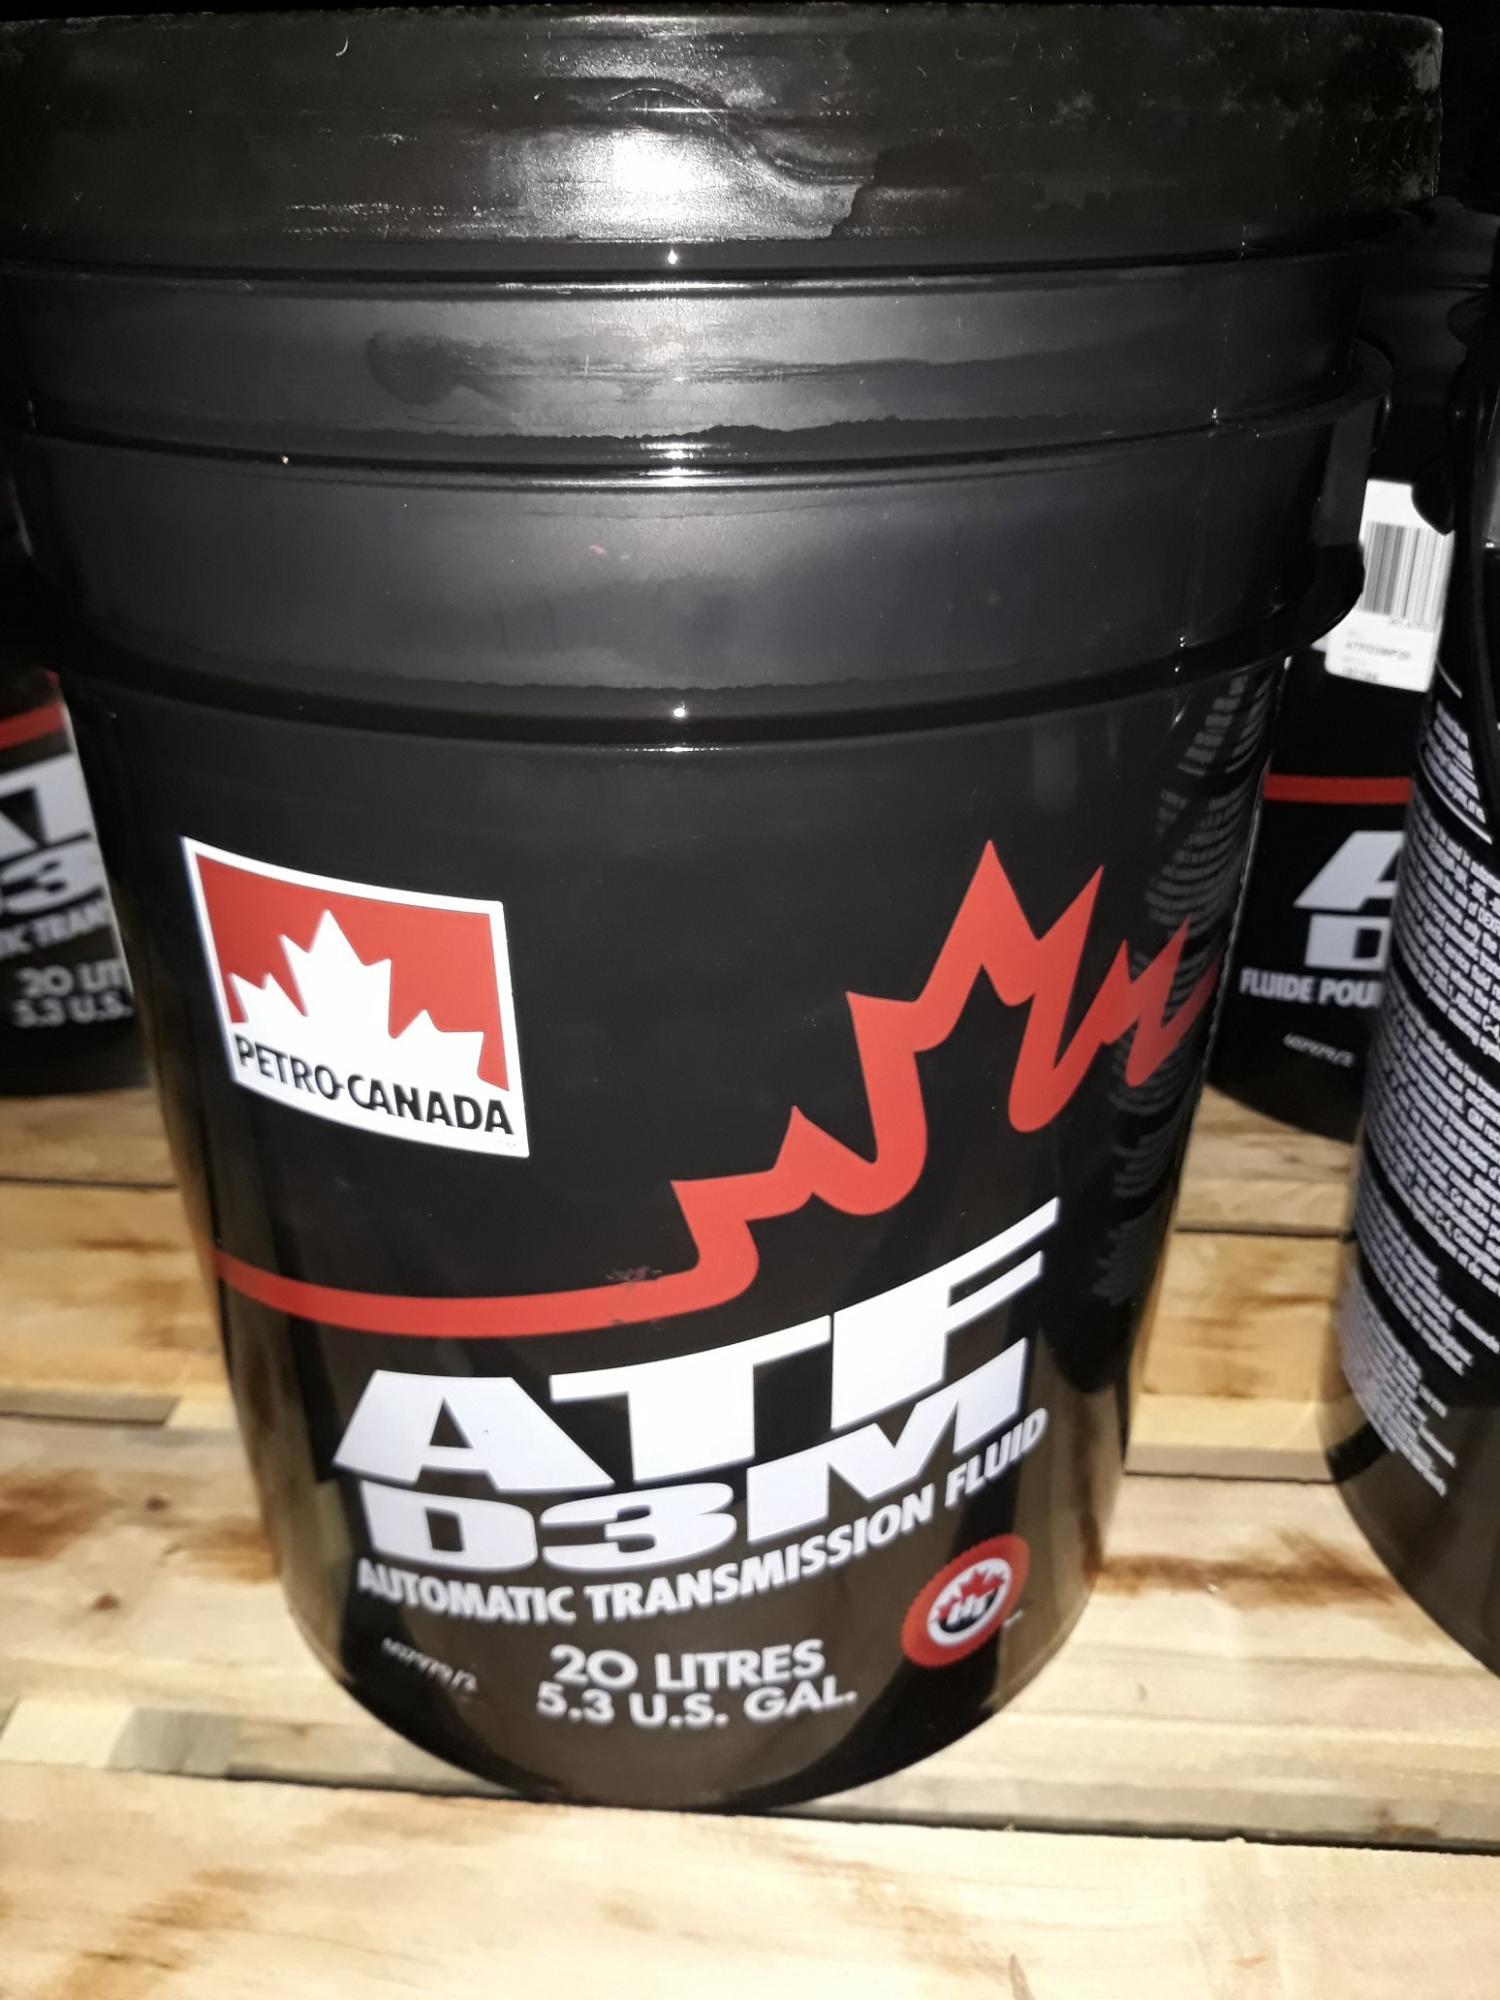 Atf d3. Petro-Canada ATF d3m. Масло Petro Canada ATF d3m. Petro-Canada ATF D-III (d3m). Petro-Canada ATF d3m Прадо 95.